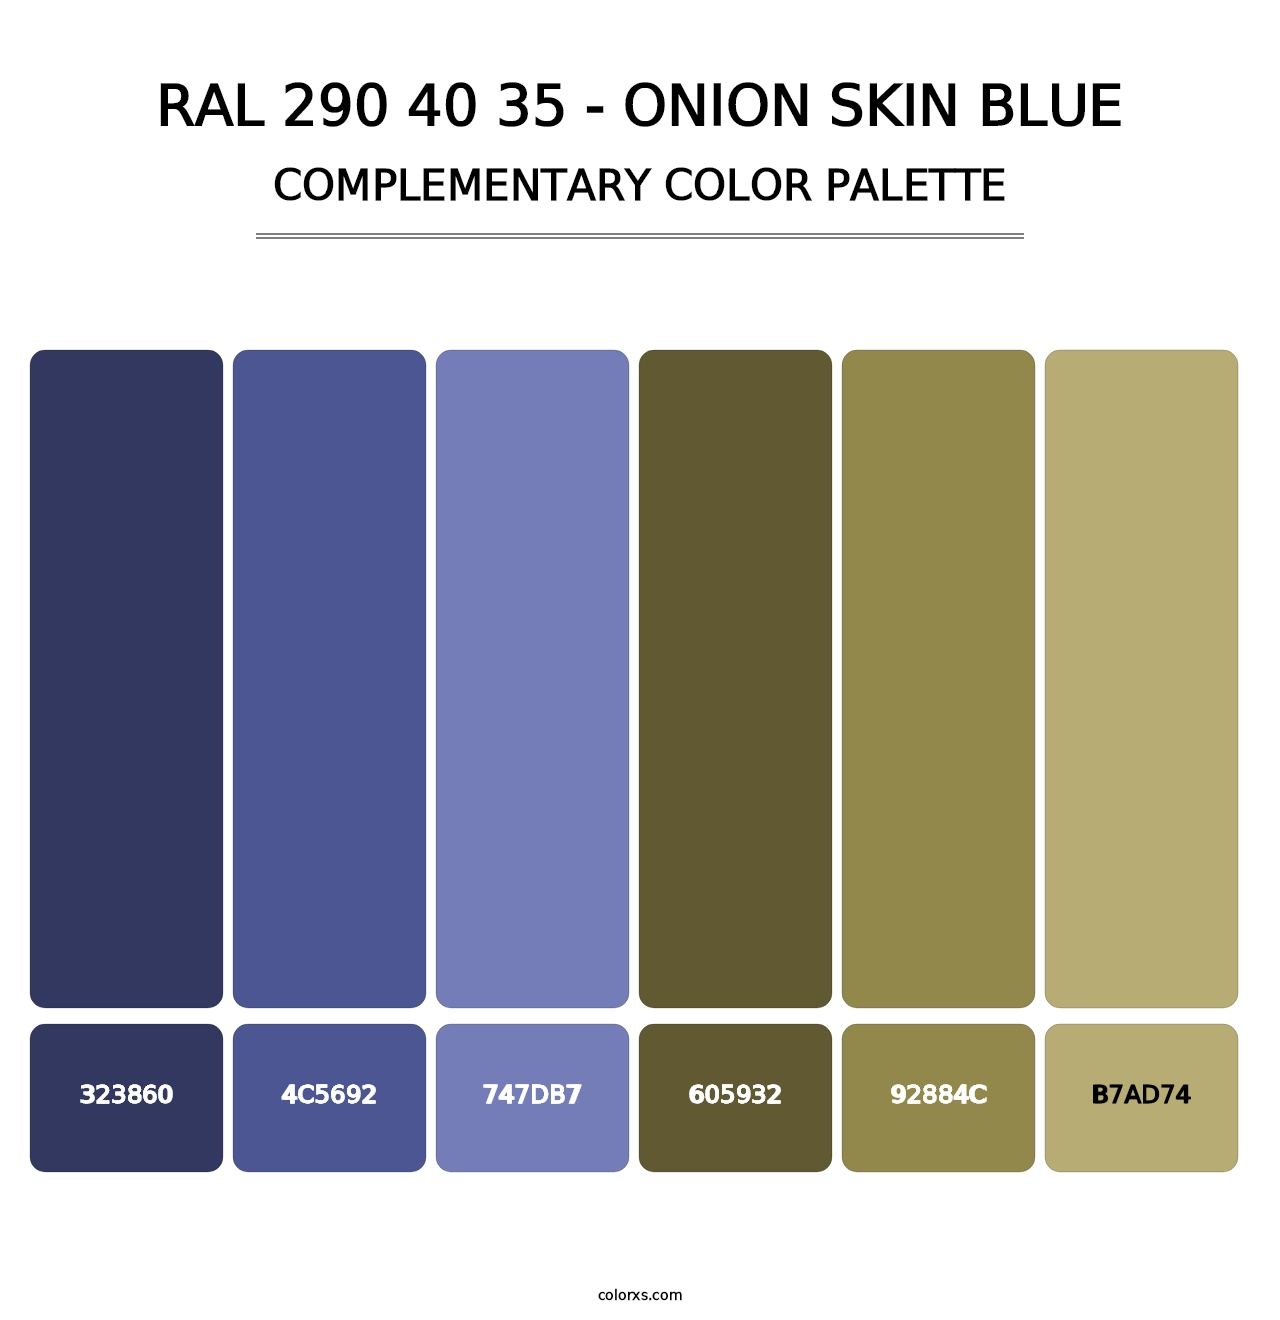 RAL 290 40 35 - Onion Skin Blue - Complementary Color Palette